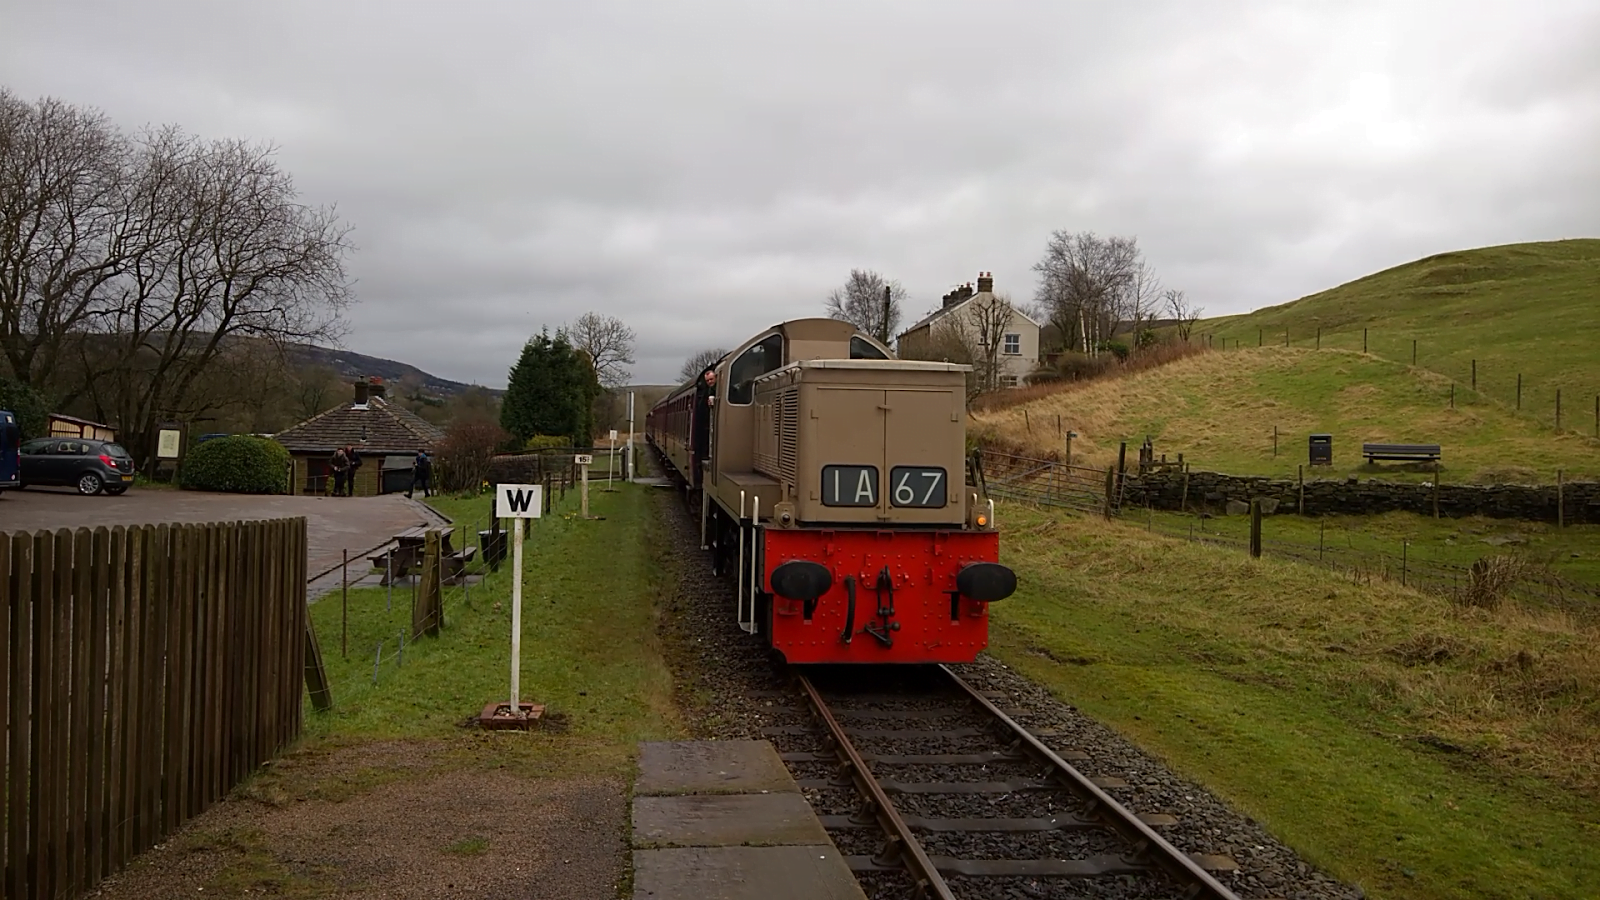 D9537 'Eric' arrives at Irwell Vale